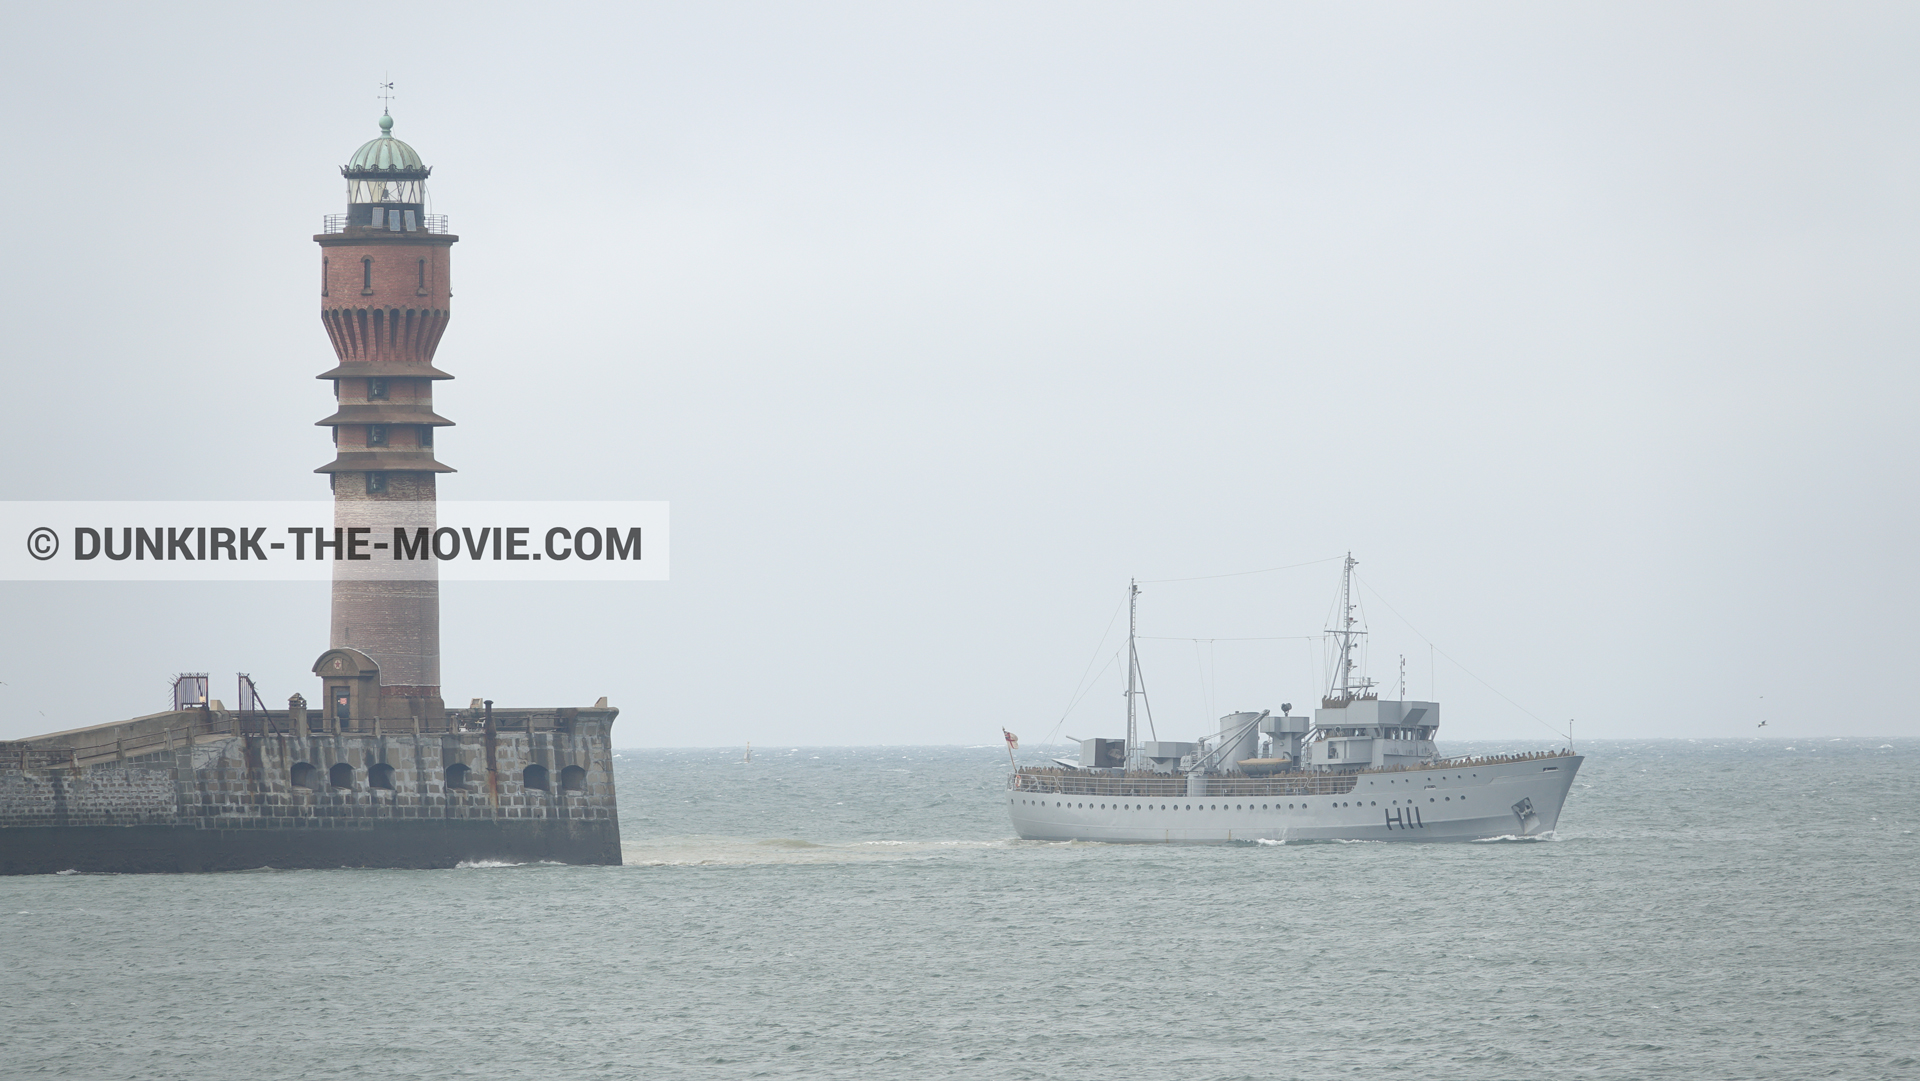 Picture with H11 - MLV Castor, St Pol sur Mer lighthouse,  from behind the scene of the Dunkirk movie by Nolan